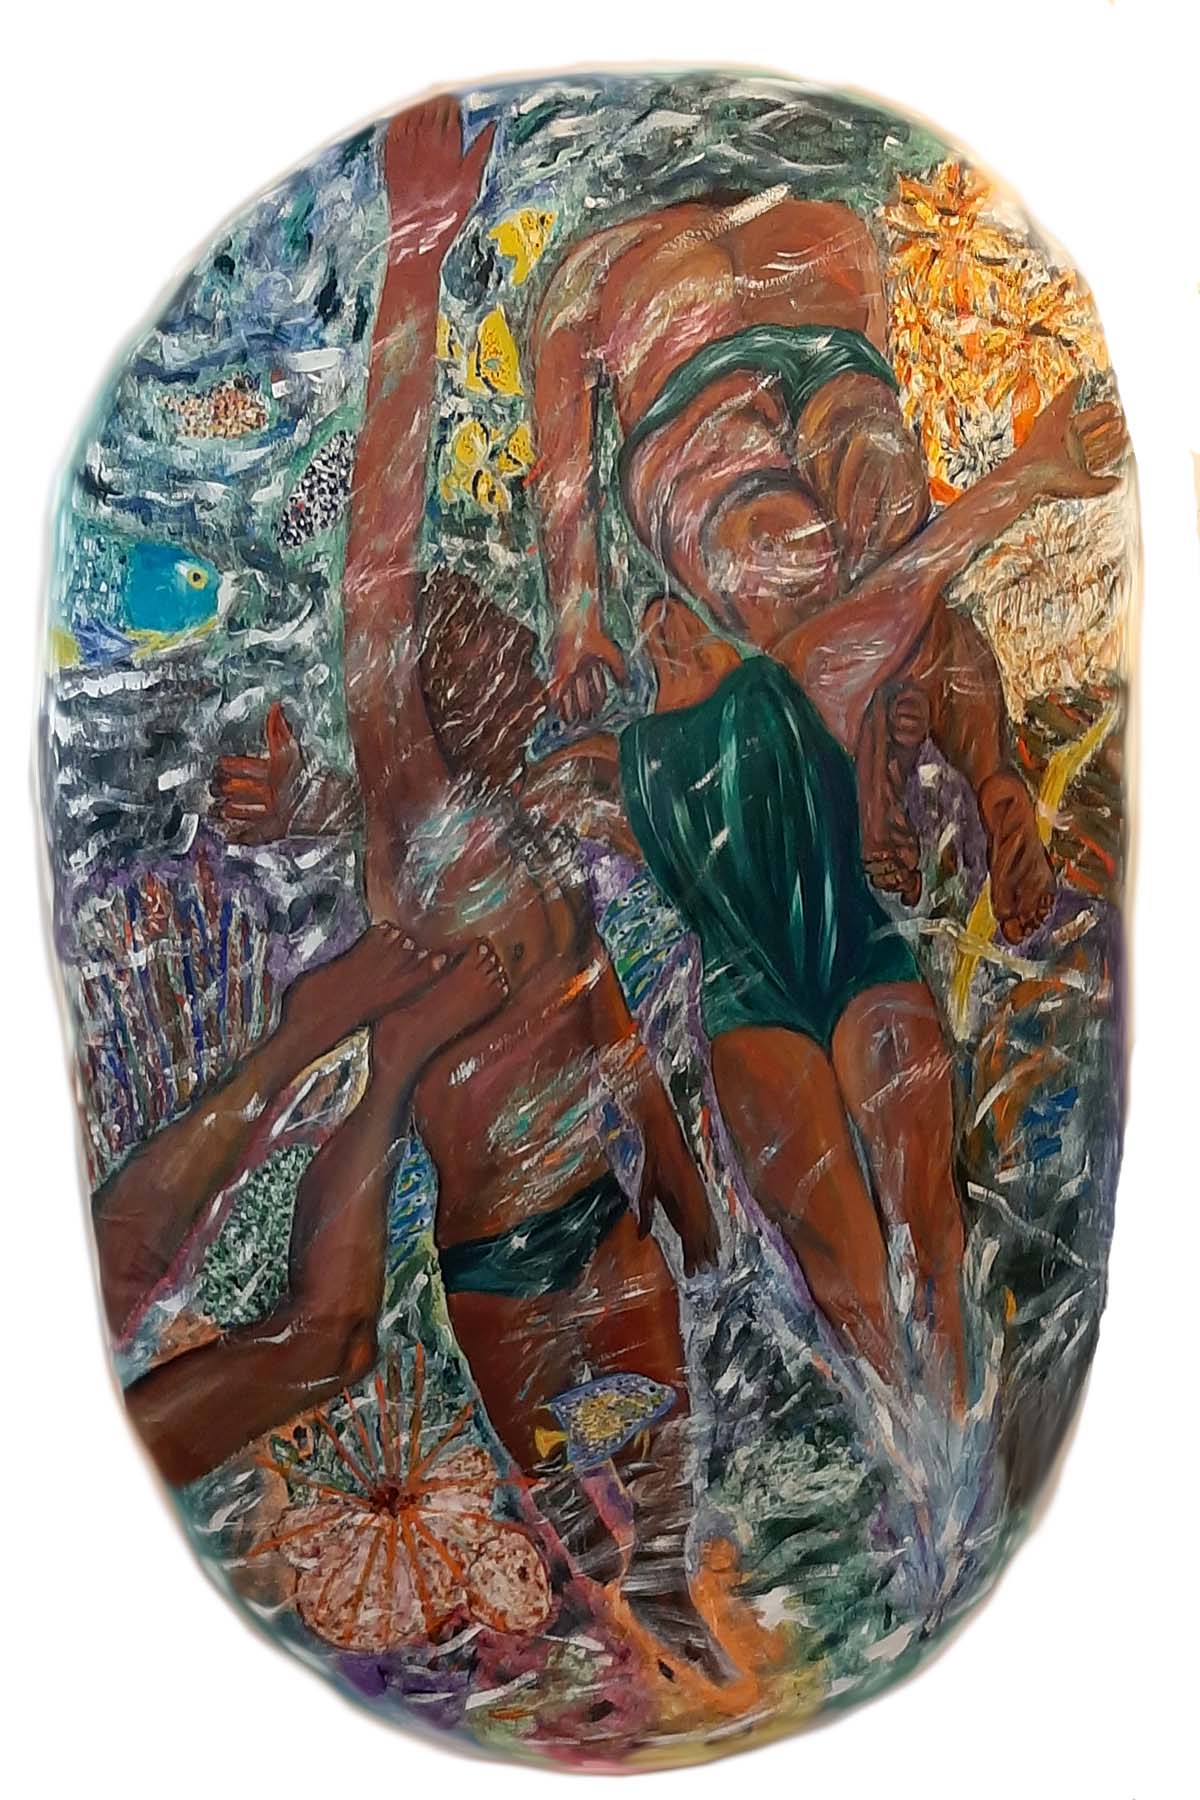 Stephen Mead: 'Swim', 1990 Oil Painting, nature. A large oval mural piece, part of the DVD collection 